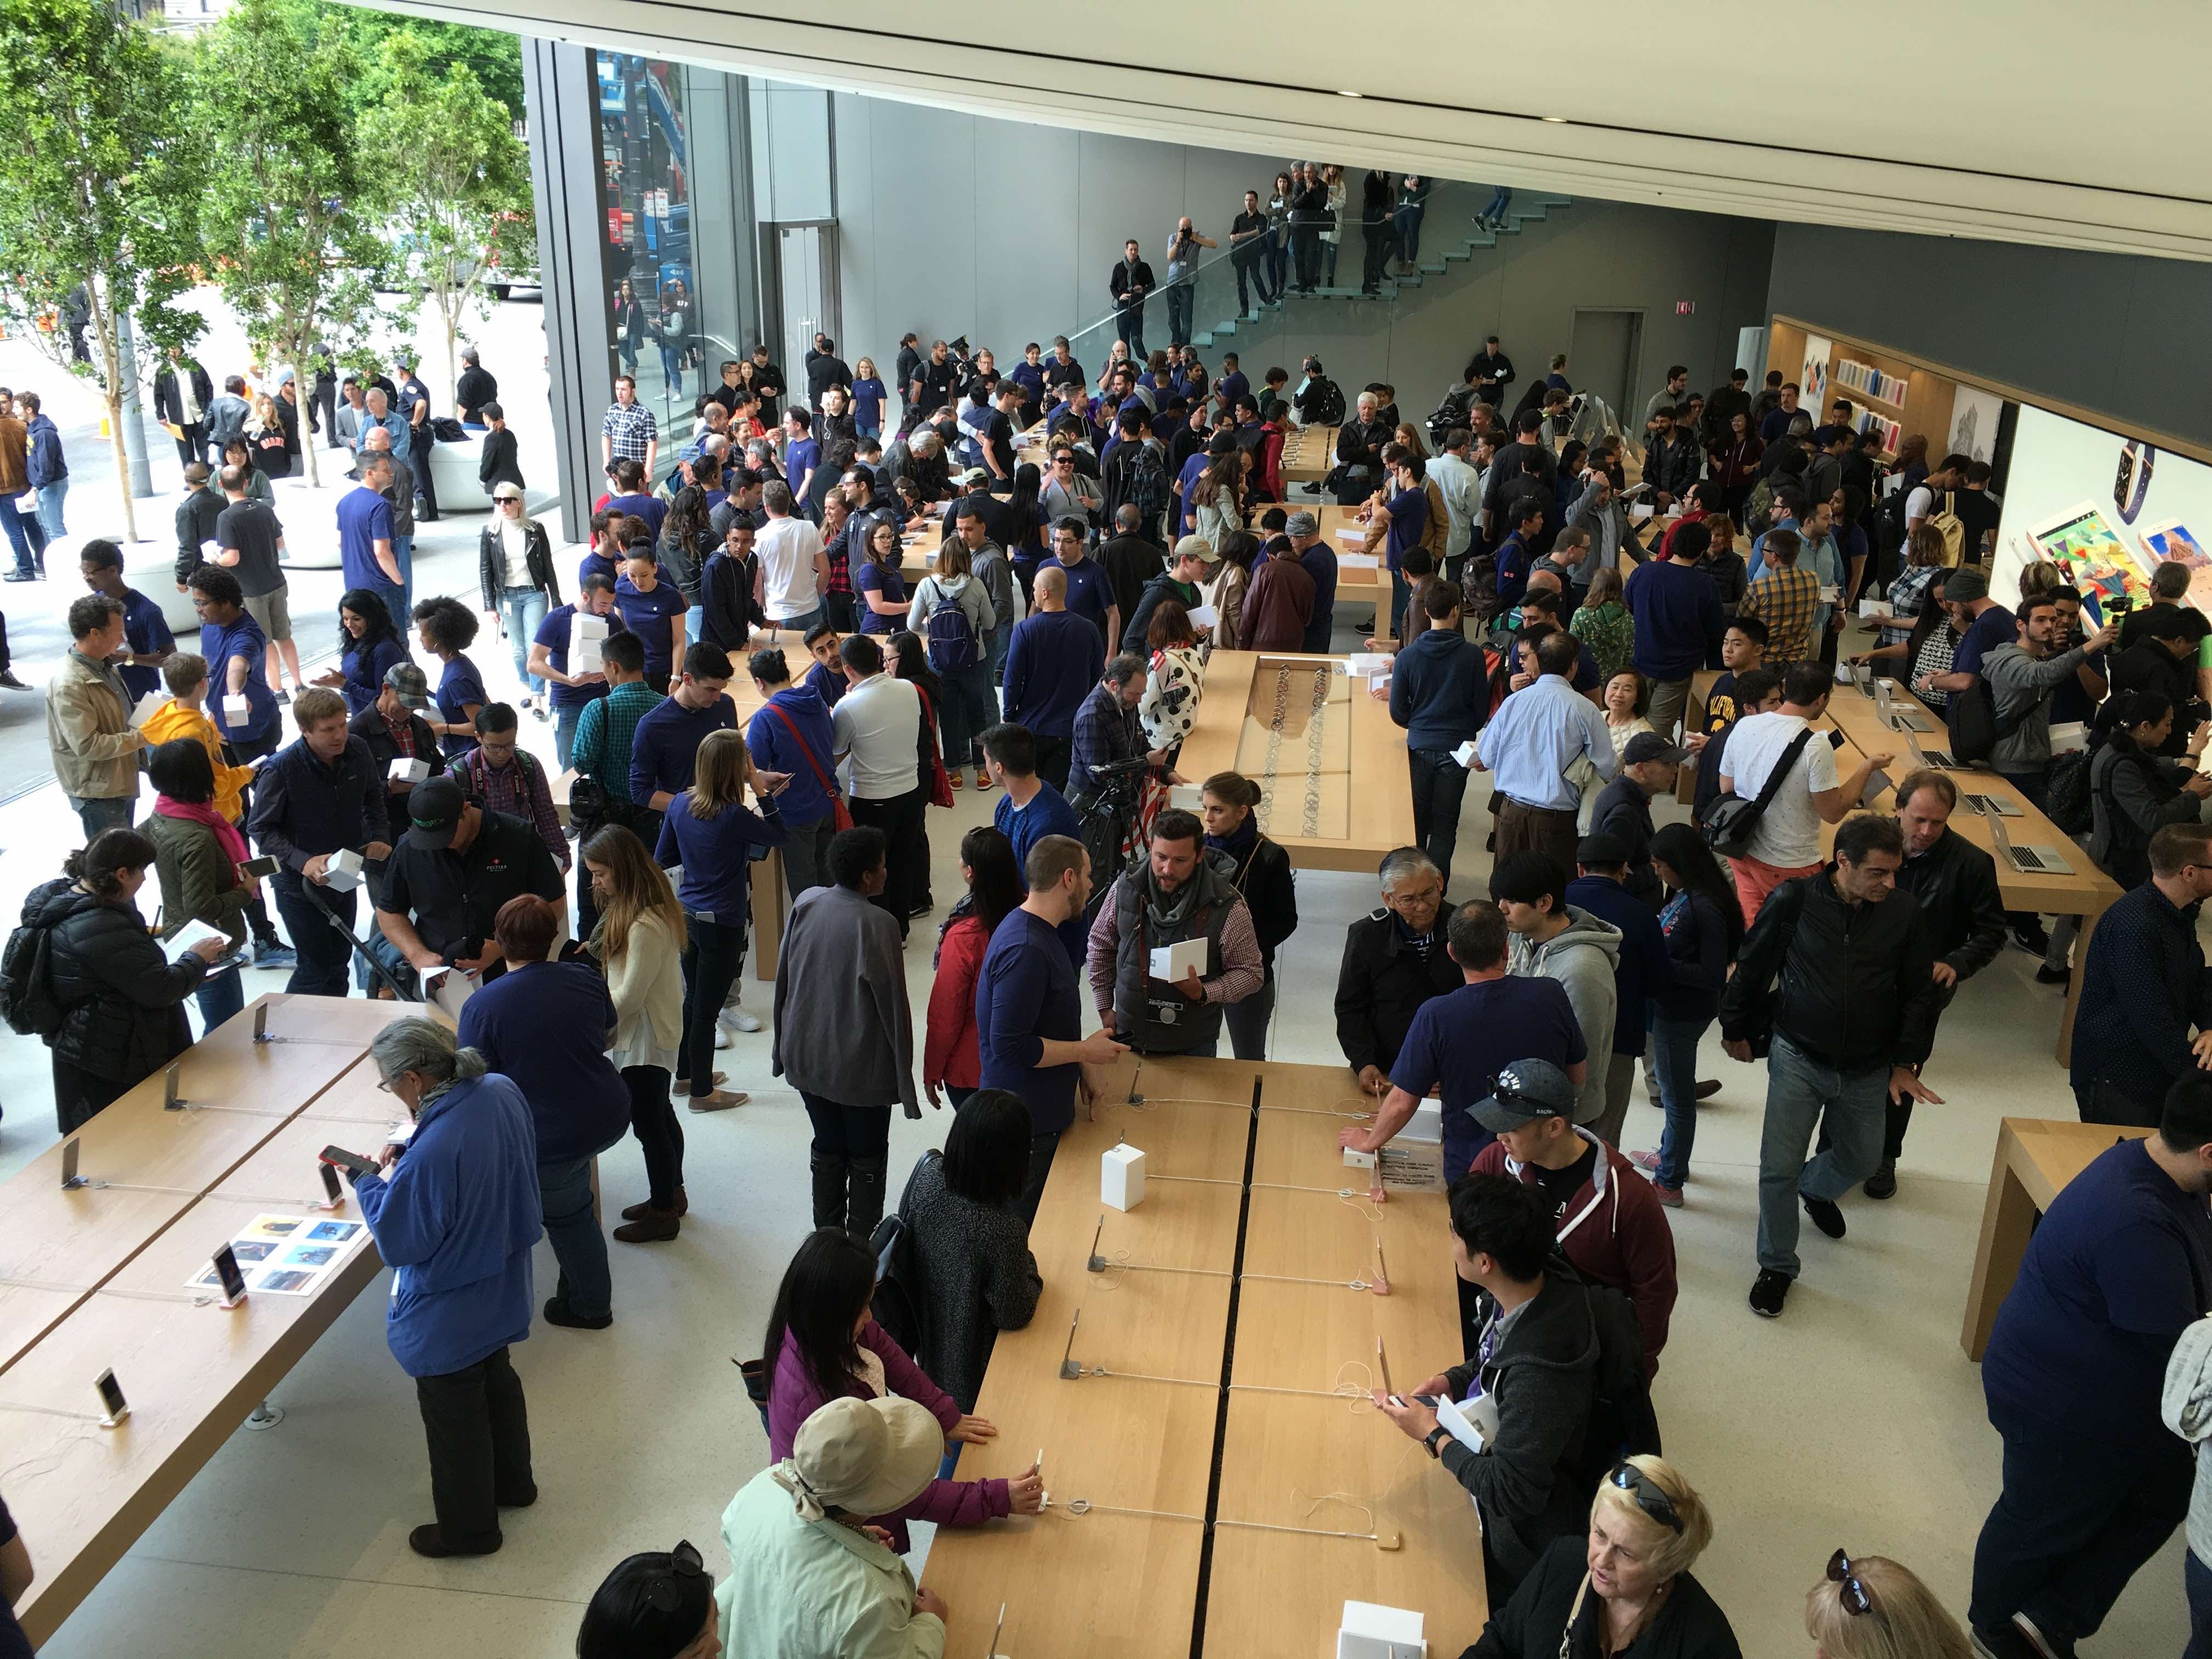 Apple Union Square now has more than 150 employees working at the store, Apple says.